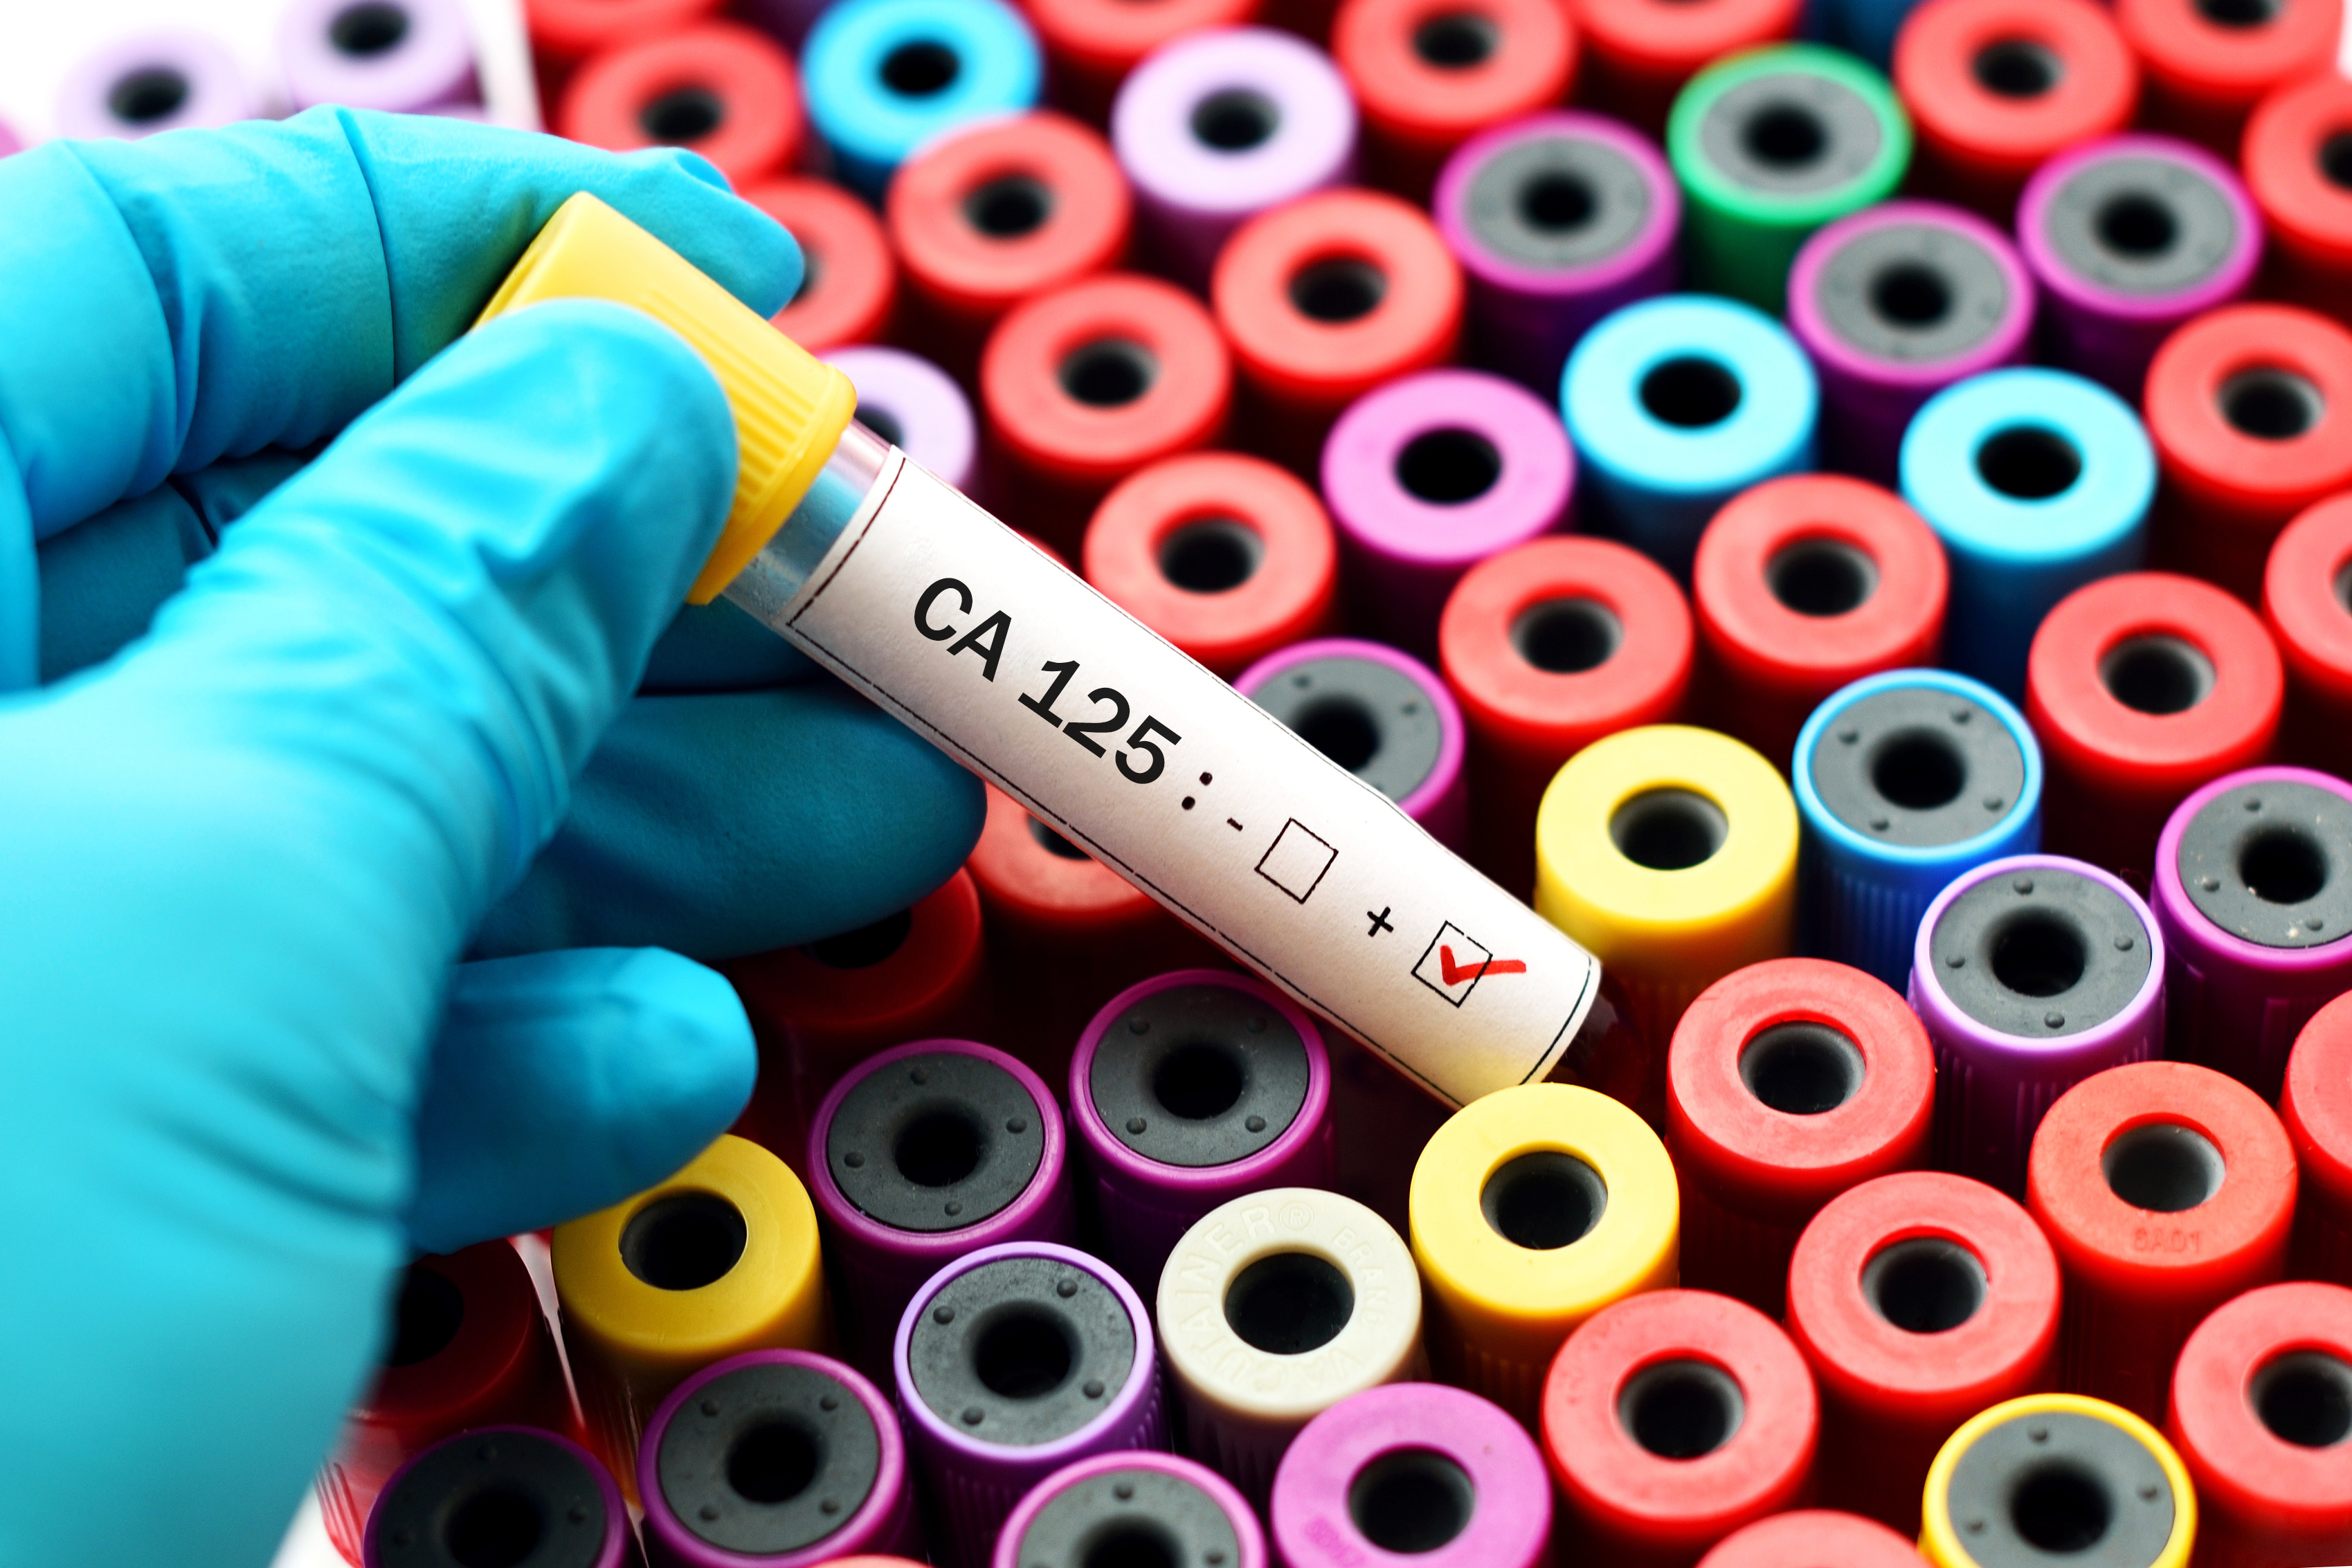 Can the CA-125 test detect other cancers?